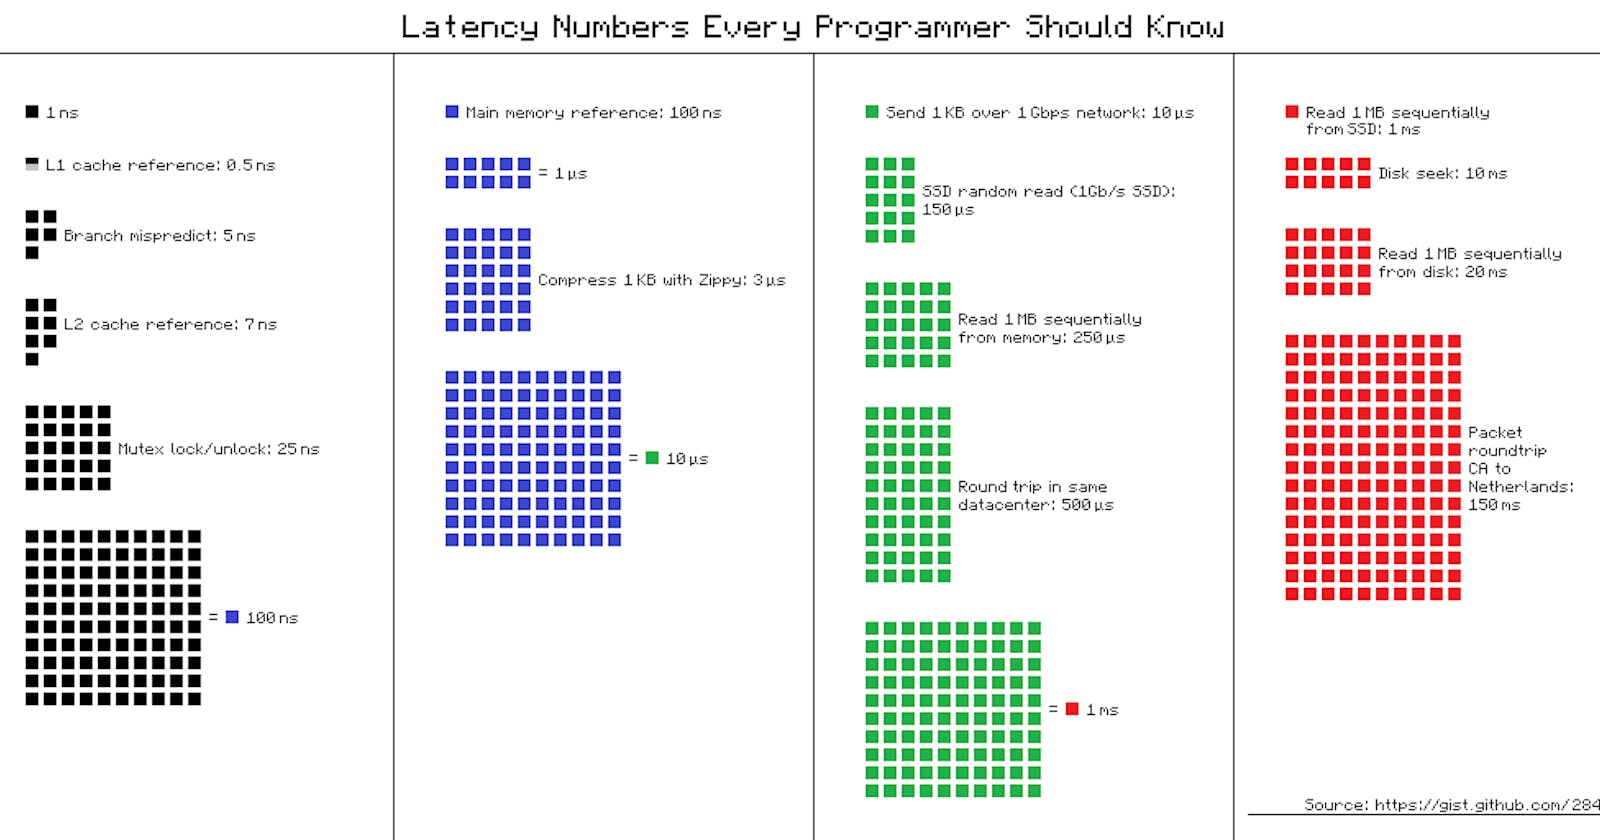 Latency Numbers Every Programmer Should Know